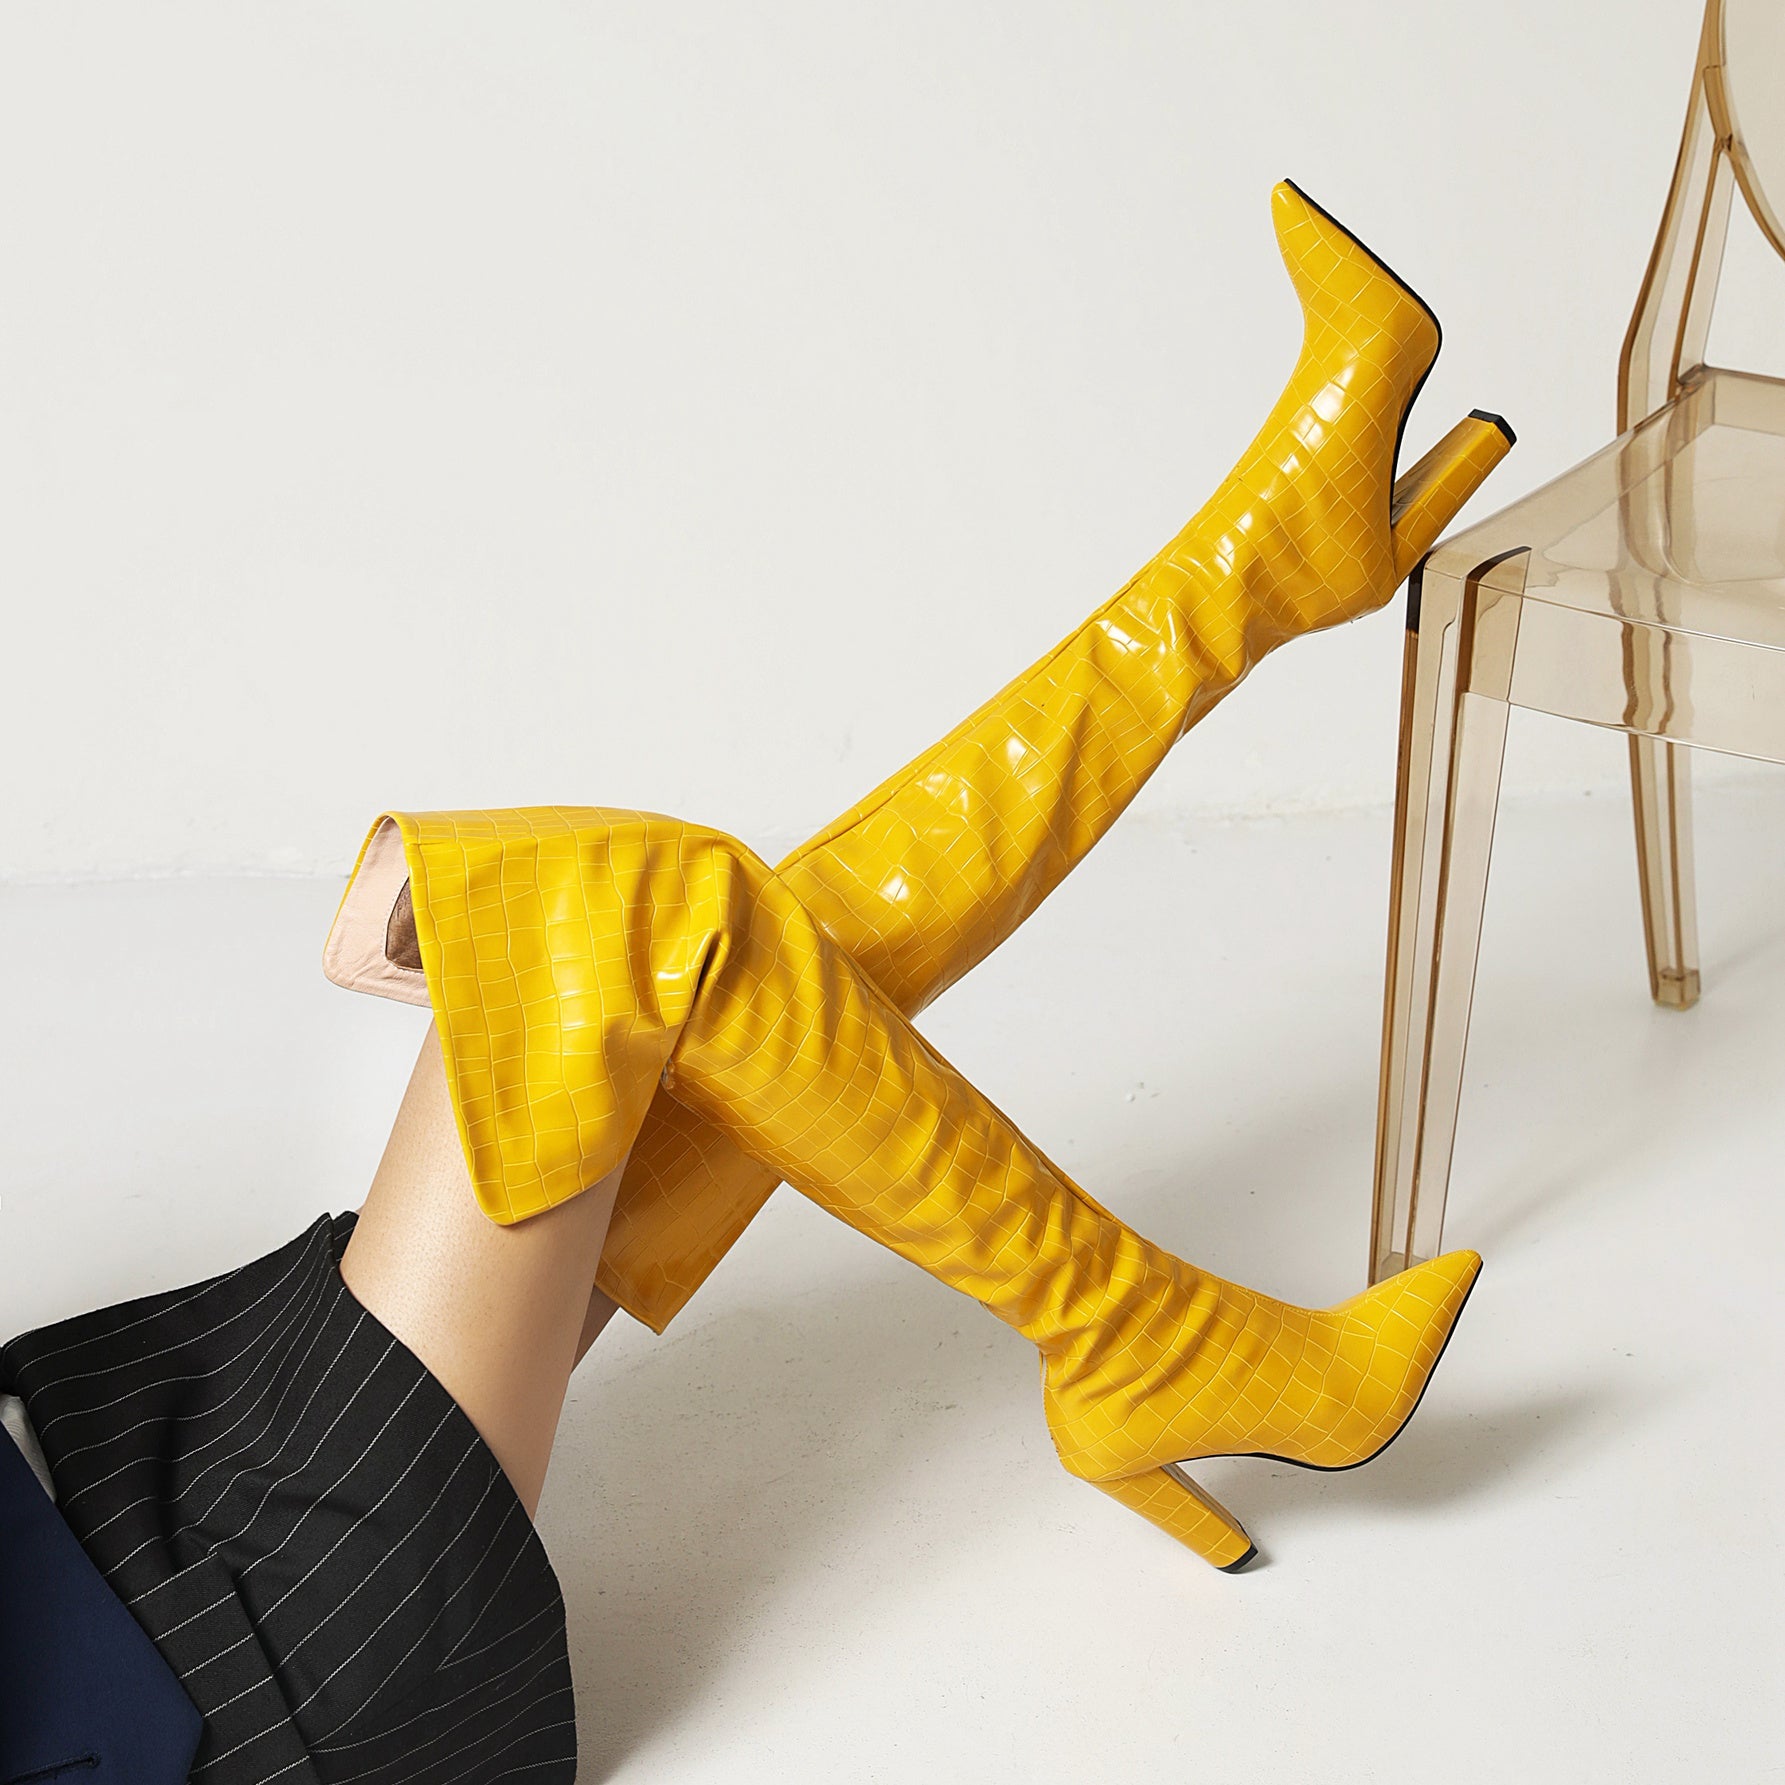 Bigsizeheels Shadow pattern pointed toe thick heel boots -Yellow freeshipping - bigsizeheel®-size5-size15 -All Plus Sizes Available!